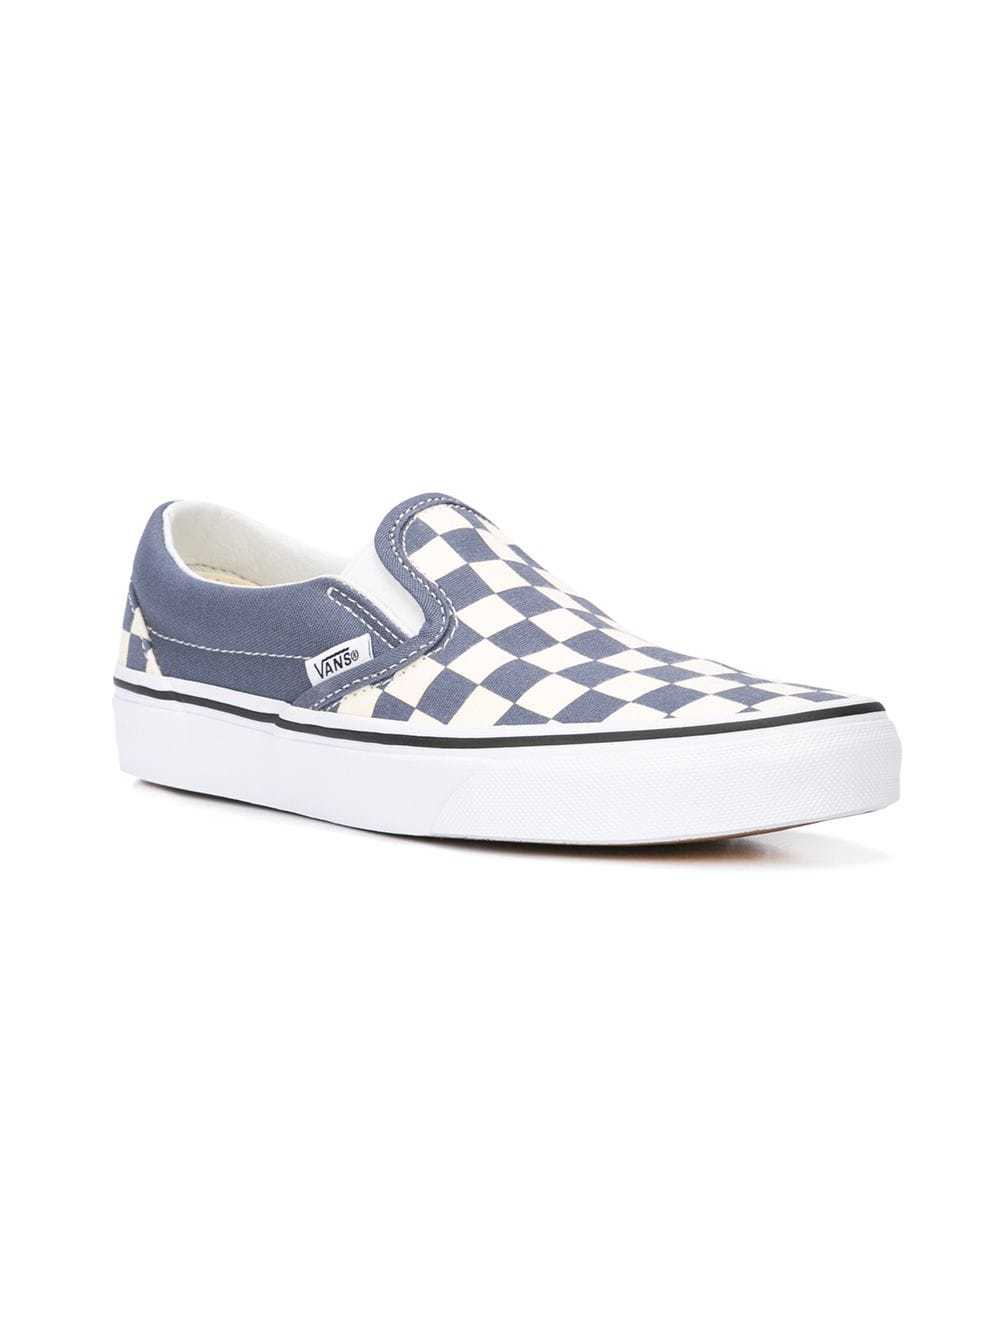 grisaille checkered vans